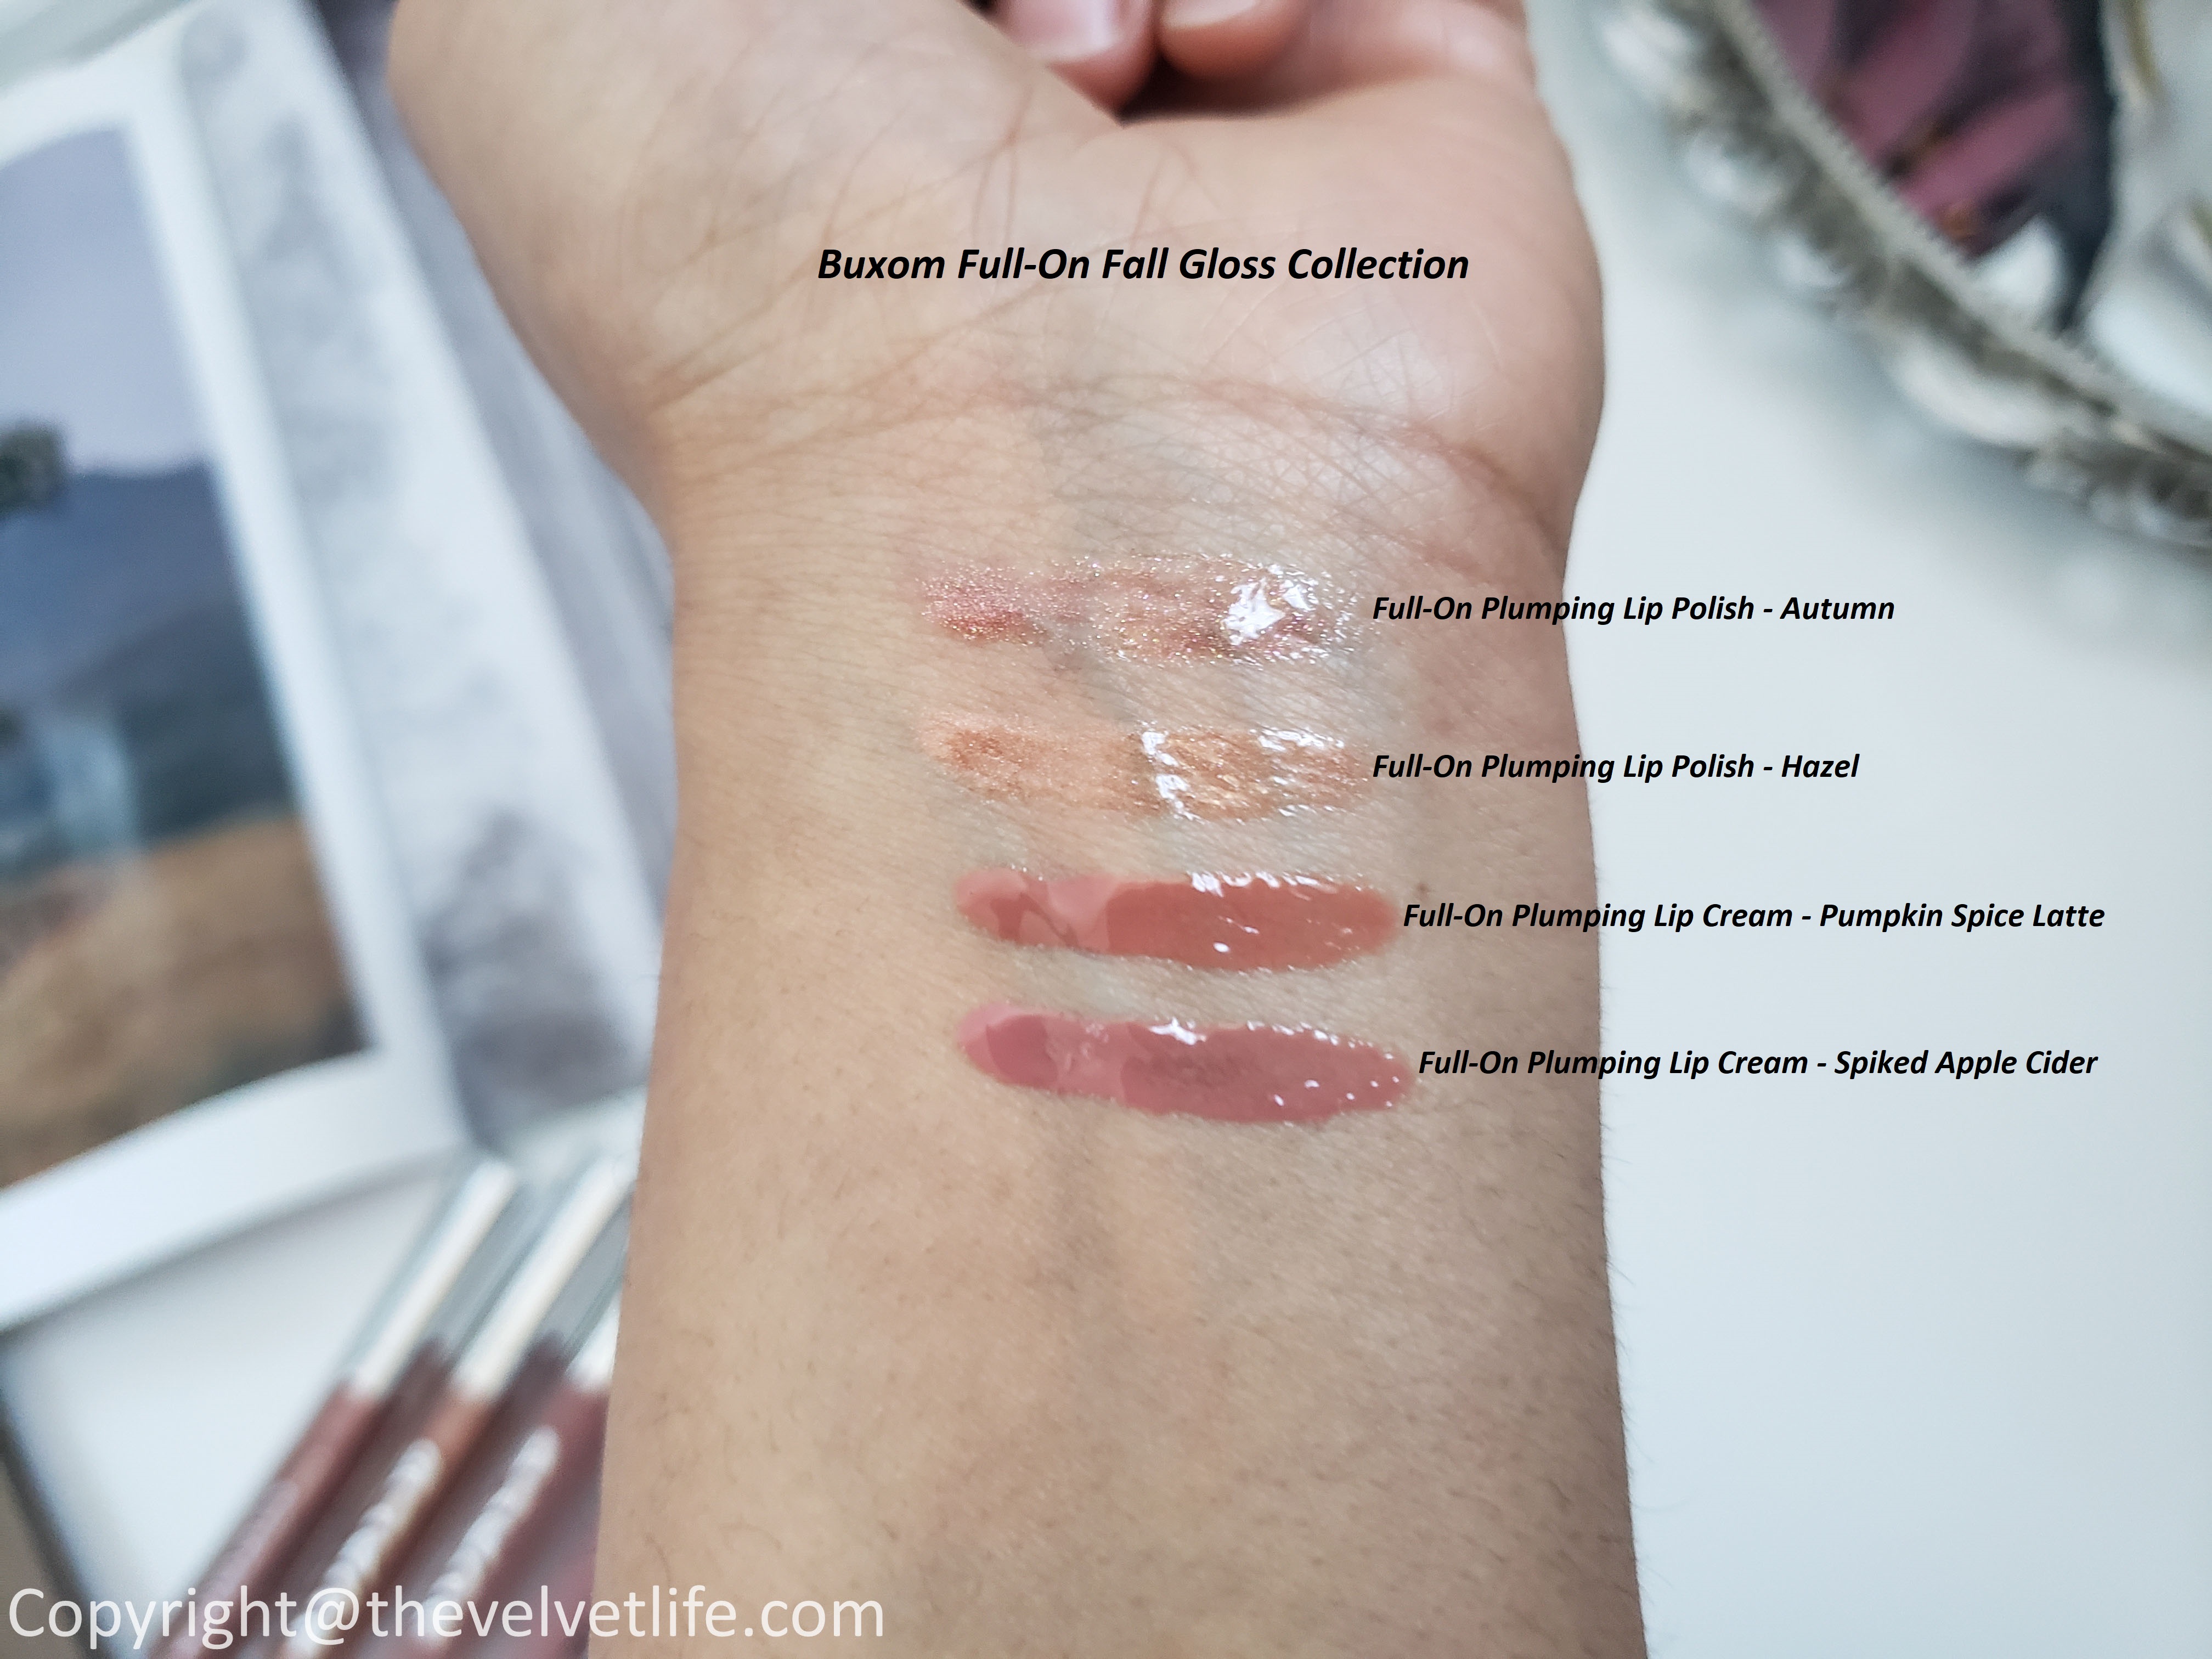 Buxom Full-On Fall Gloss Collection limited-edition review swatches of two Full-On Plumping Lip Polishes and two Full-On Plumping Lip Creams